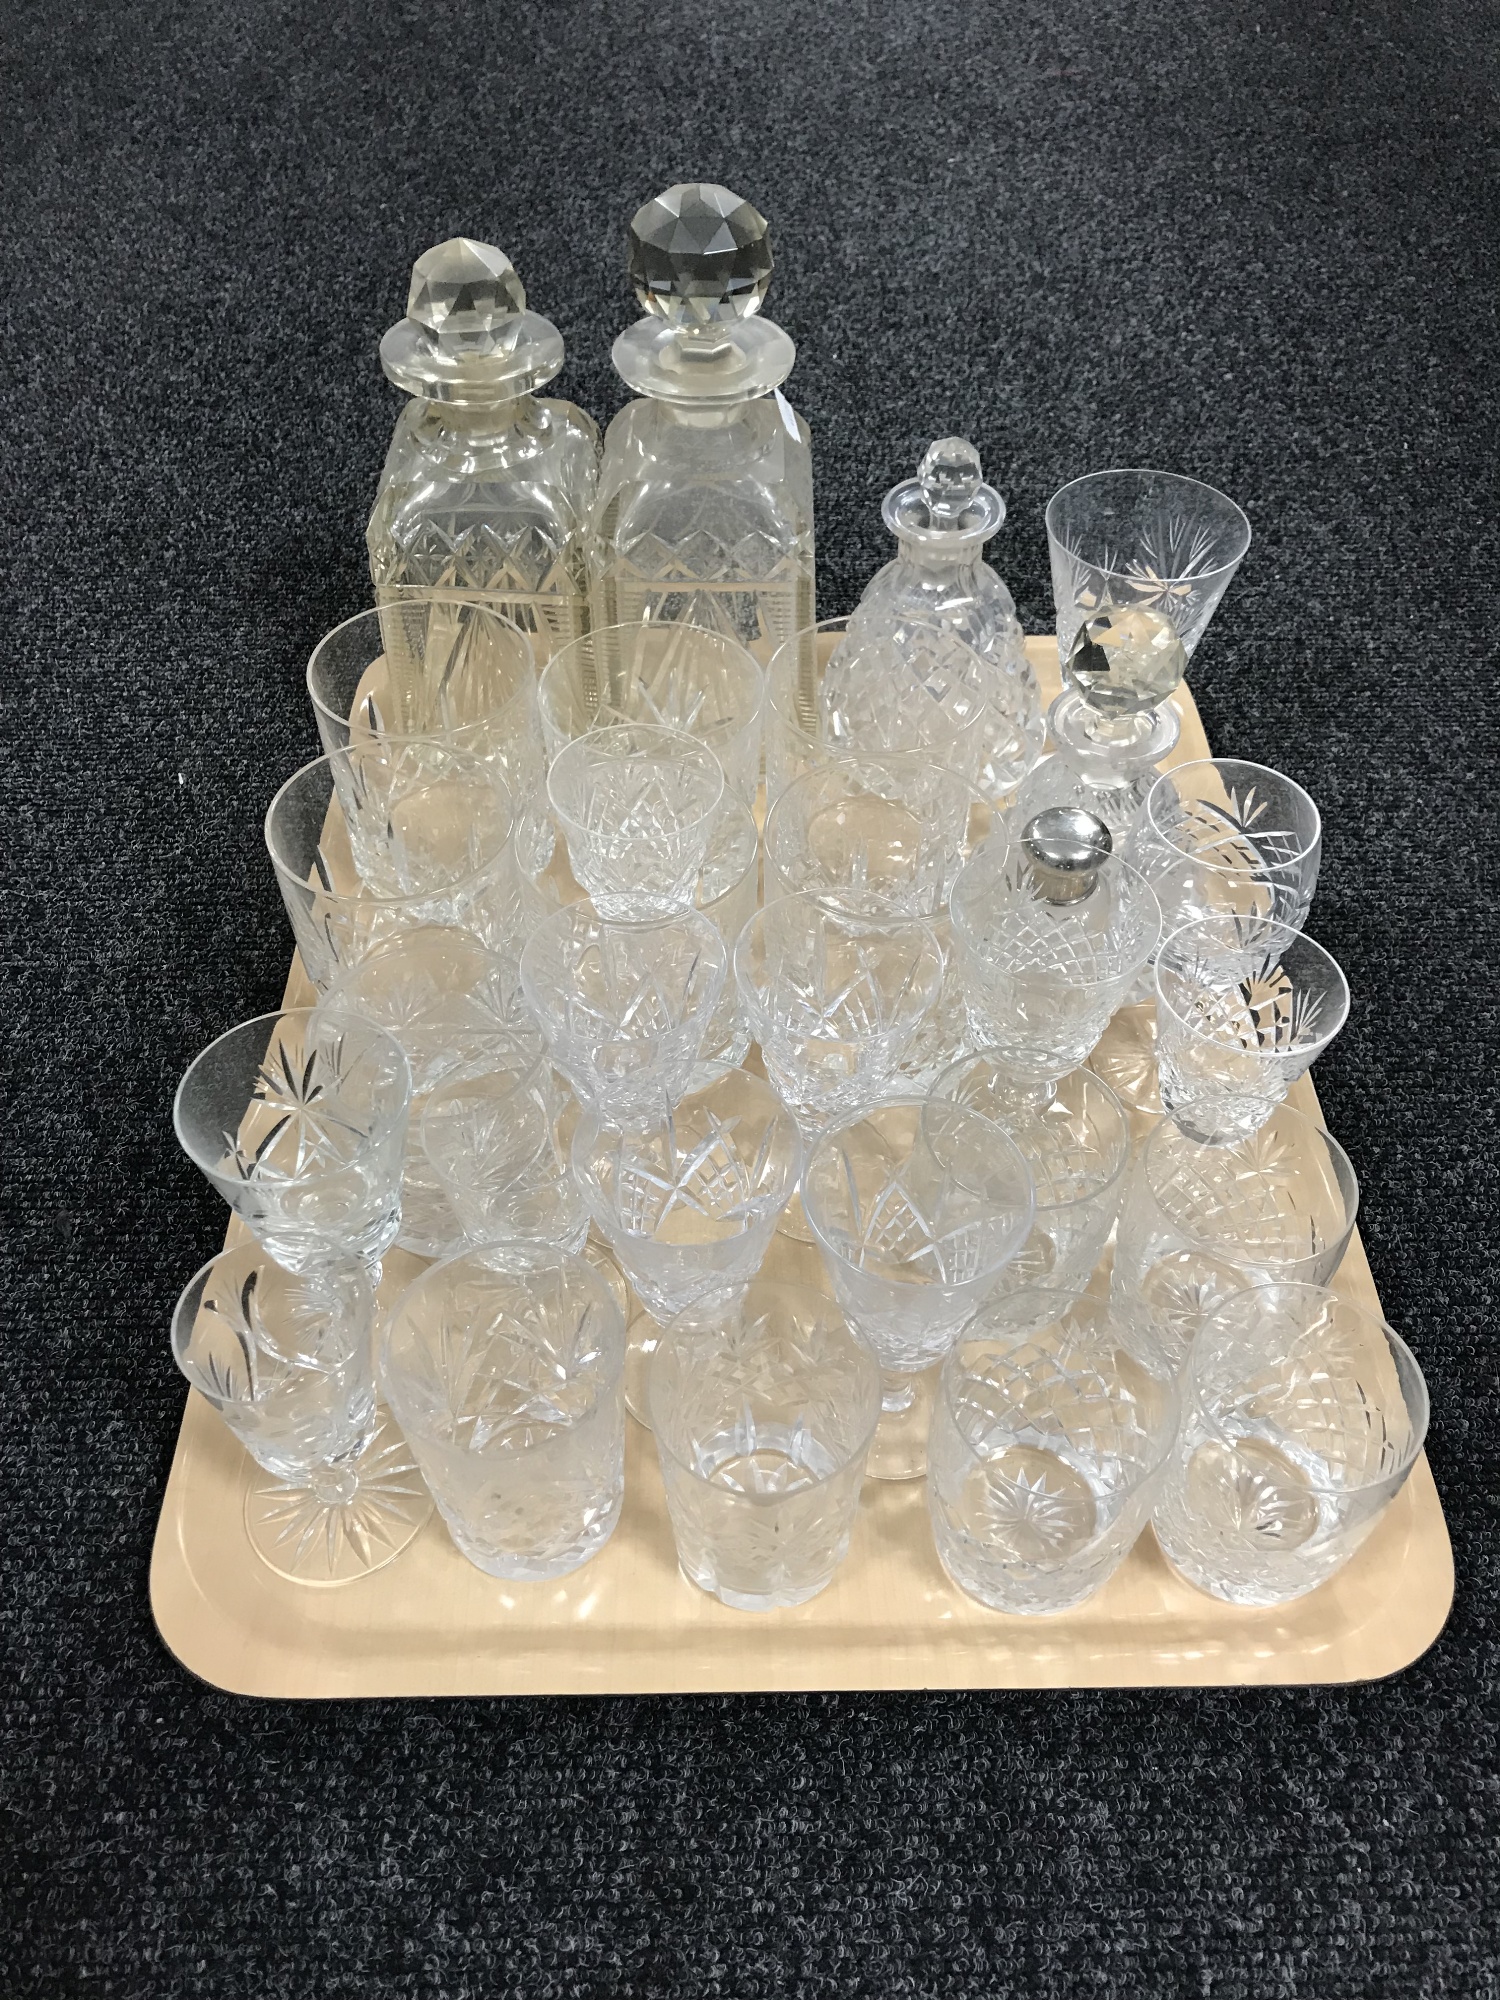 A tray of crystal glasses and decanters